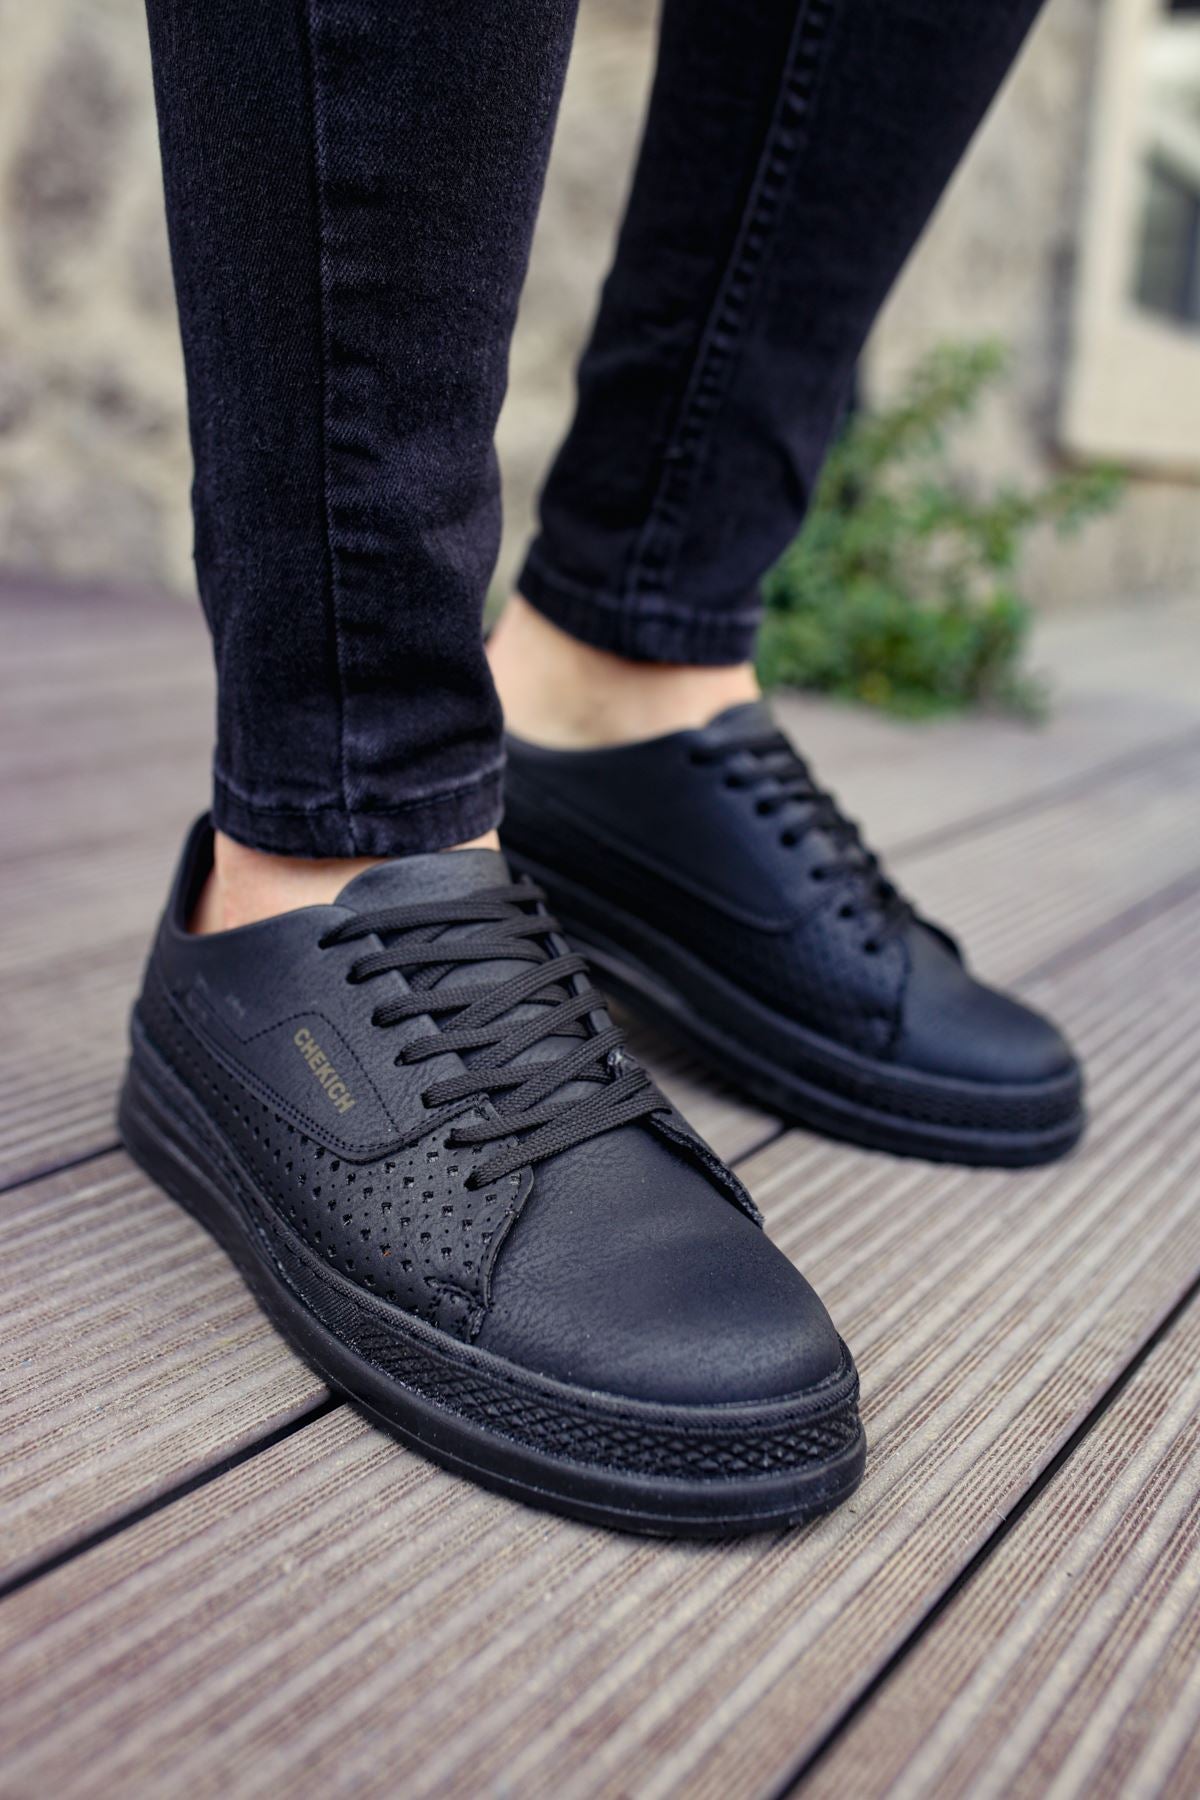 CH043 Men's Unisex Full Black Casual Shoes - STREETMODE ™